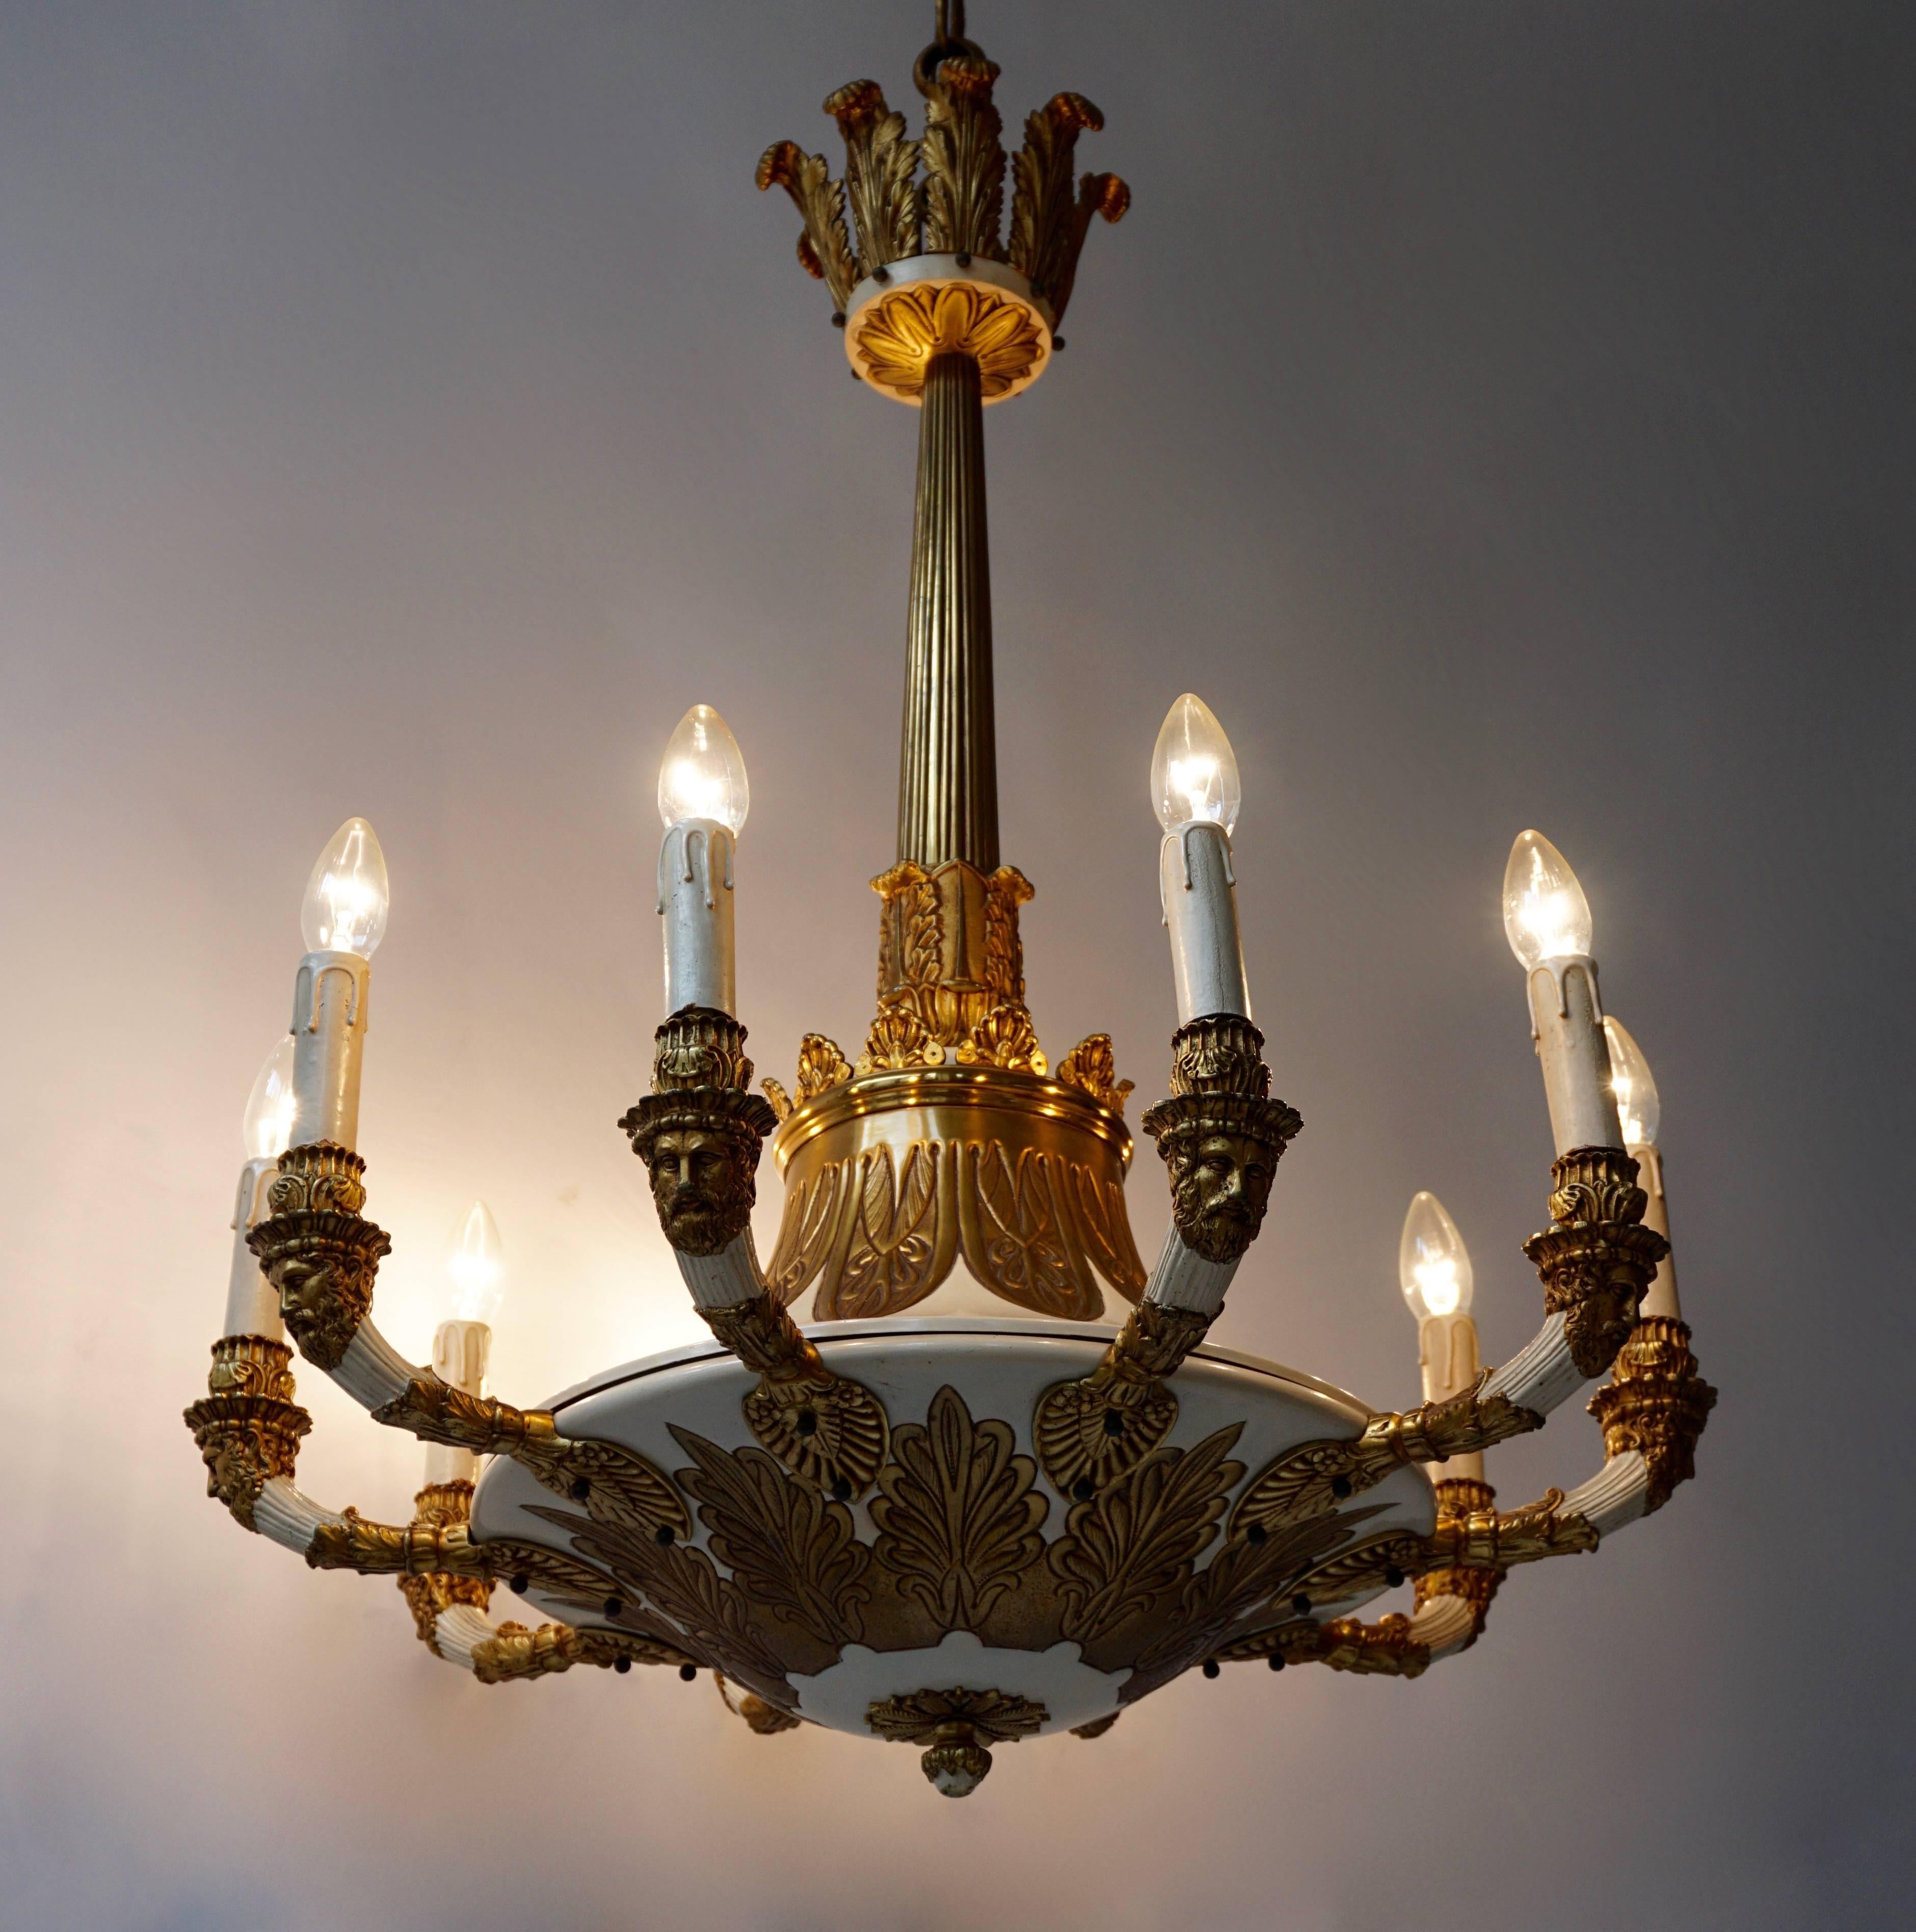 An highly interesting and decorative chandelier, in brass, with white painted sections, and with ten arms, with leaf motifs and the candleholders coming out of prestigious men’s- heads with crowns and beards.
Origin: France
Age: round circa